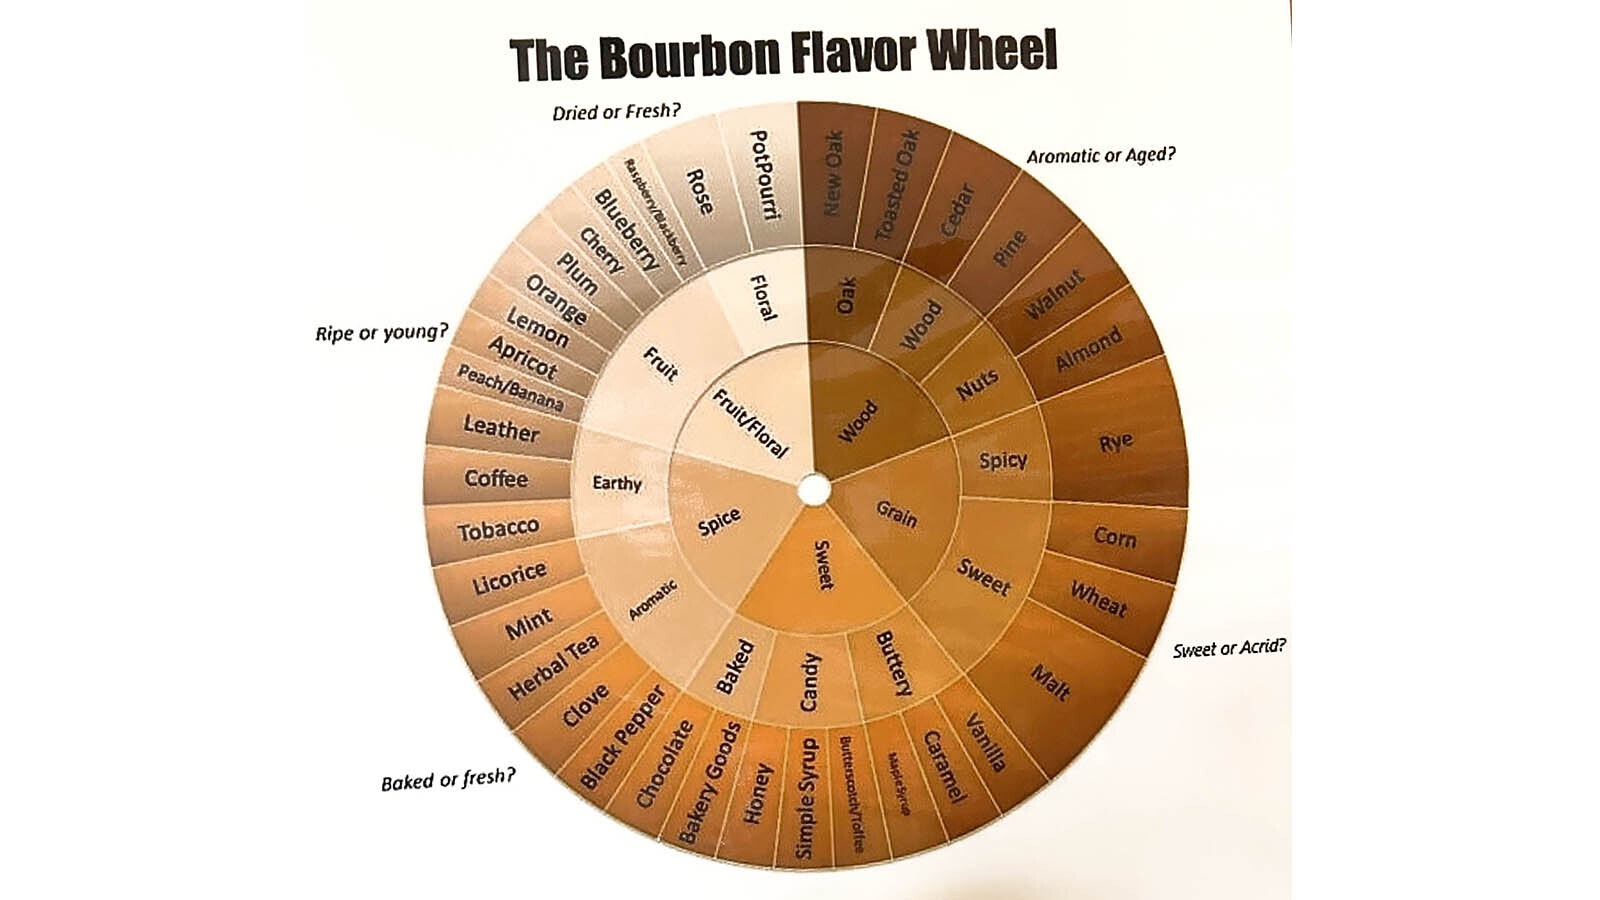 The bourbon flavor wheel shows how flavors are associated with colors.